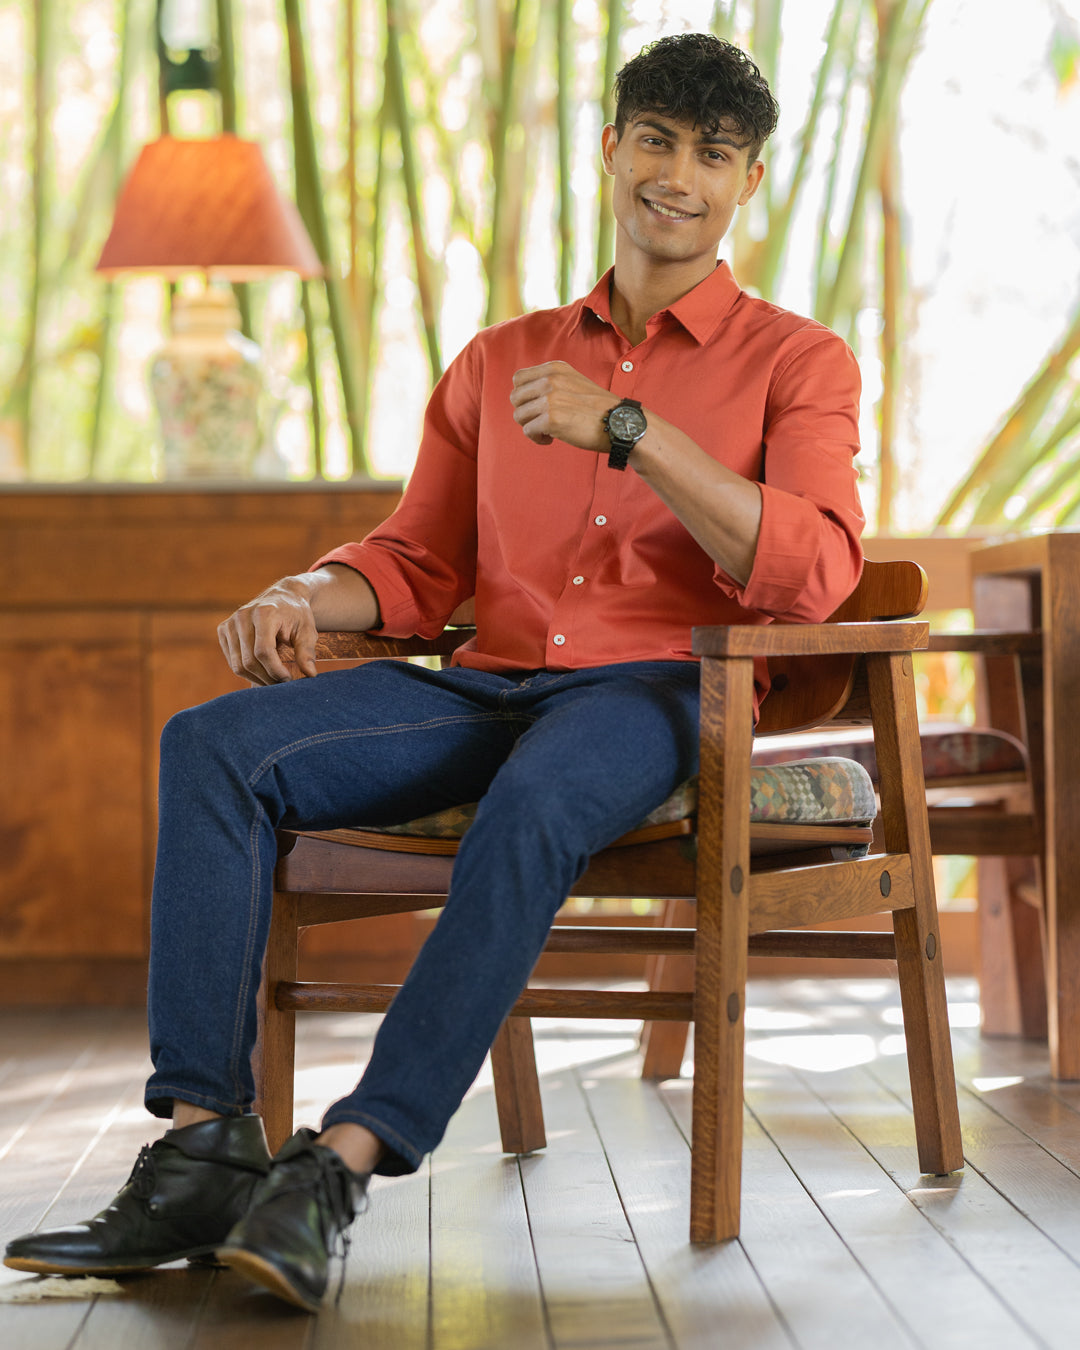 A man with dark hair, wearing a red shirt crafted from premium cotton and blue jeans, is sitting on a wooden chair indoors. He is smiling and has one arm rested on the chair's armrest while the other hand is slightly raised. The background features wooden furniture and soft lighting from the Scarlatto - Classic Shirt.